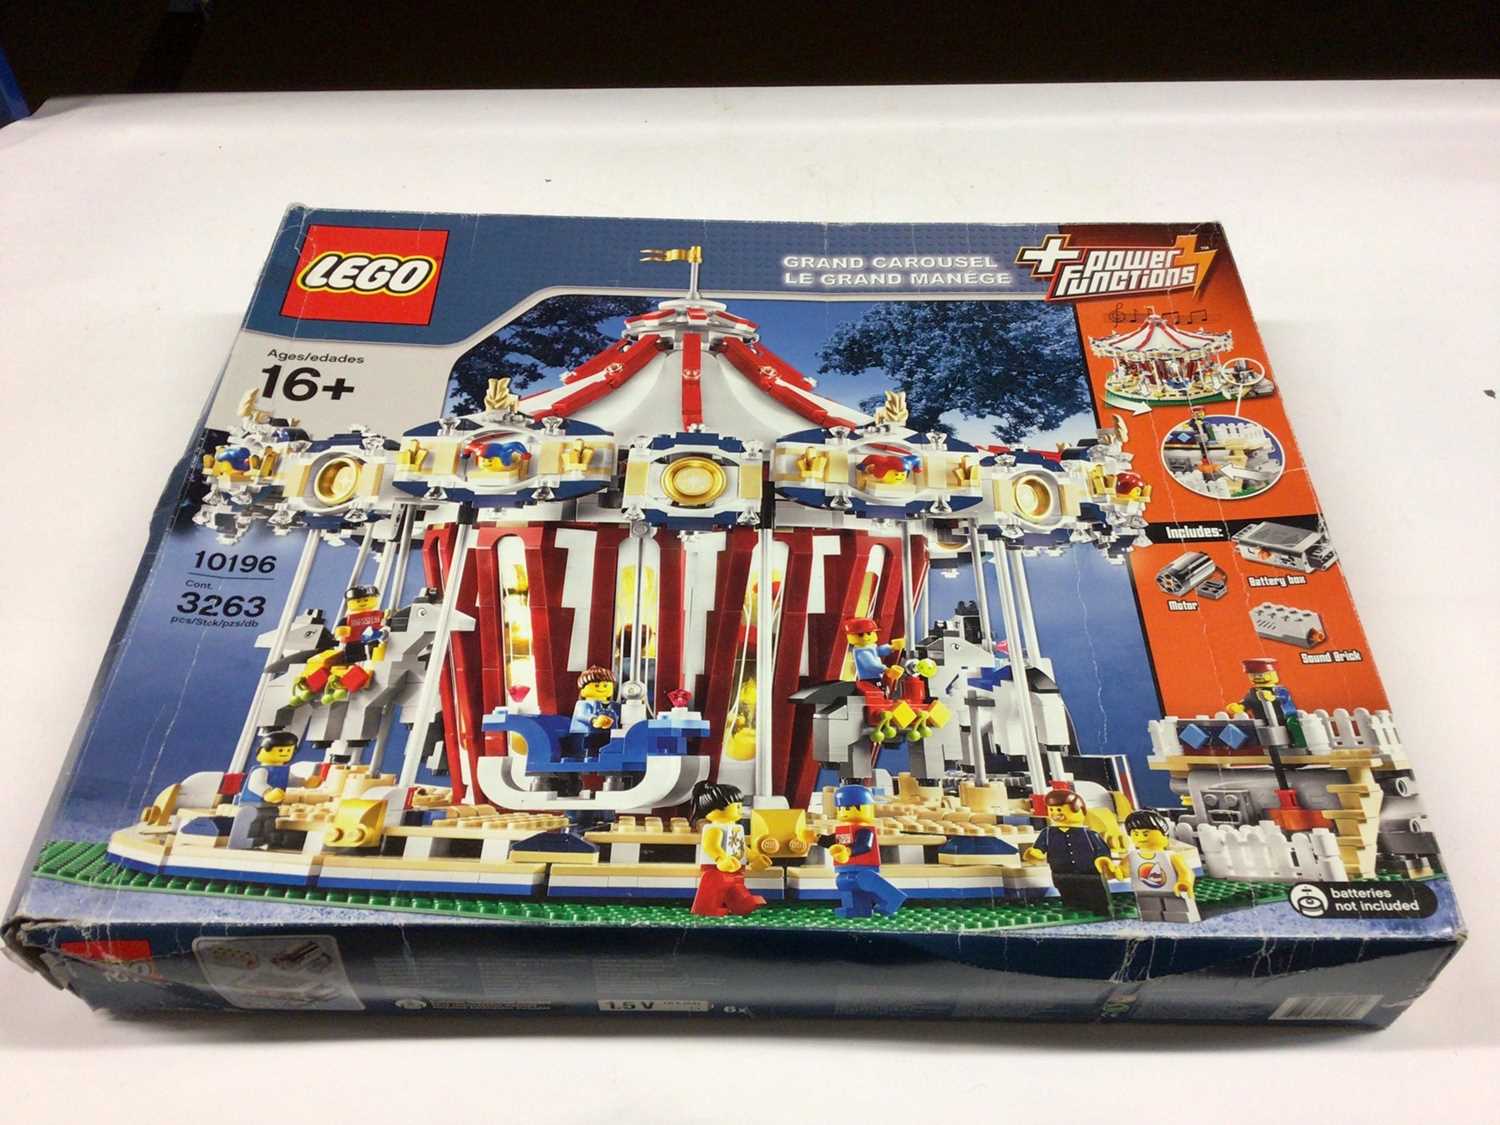 Lot 40 - Lego Building 10190 Grand Carousel (Orignal), with instructions, Boxed